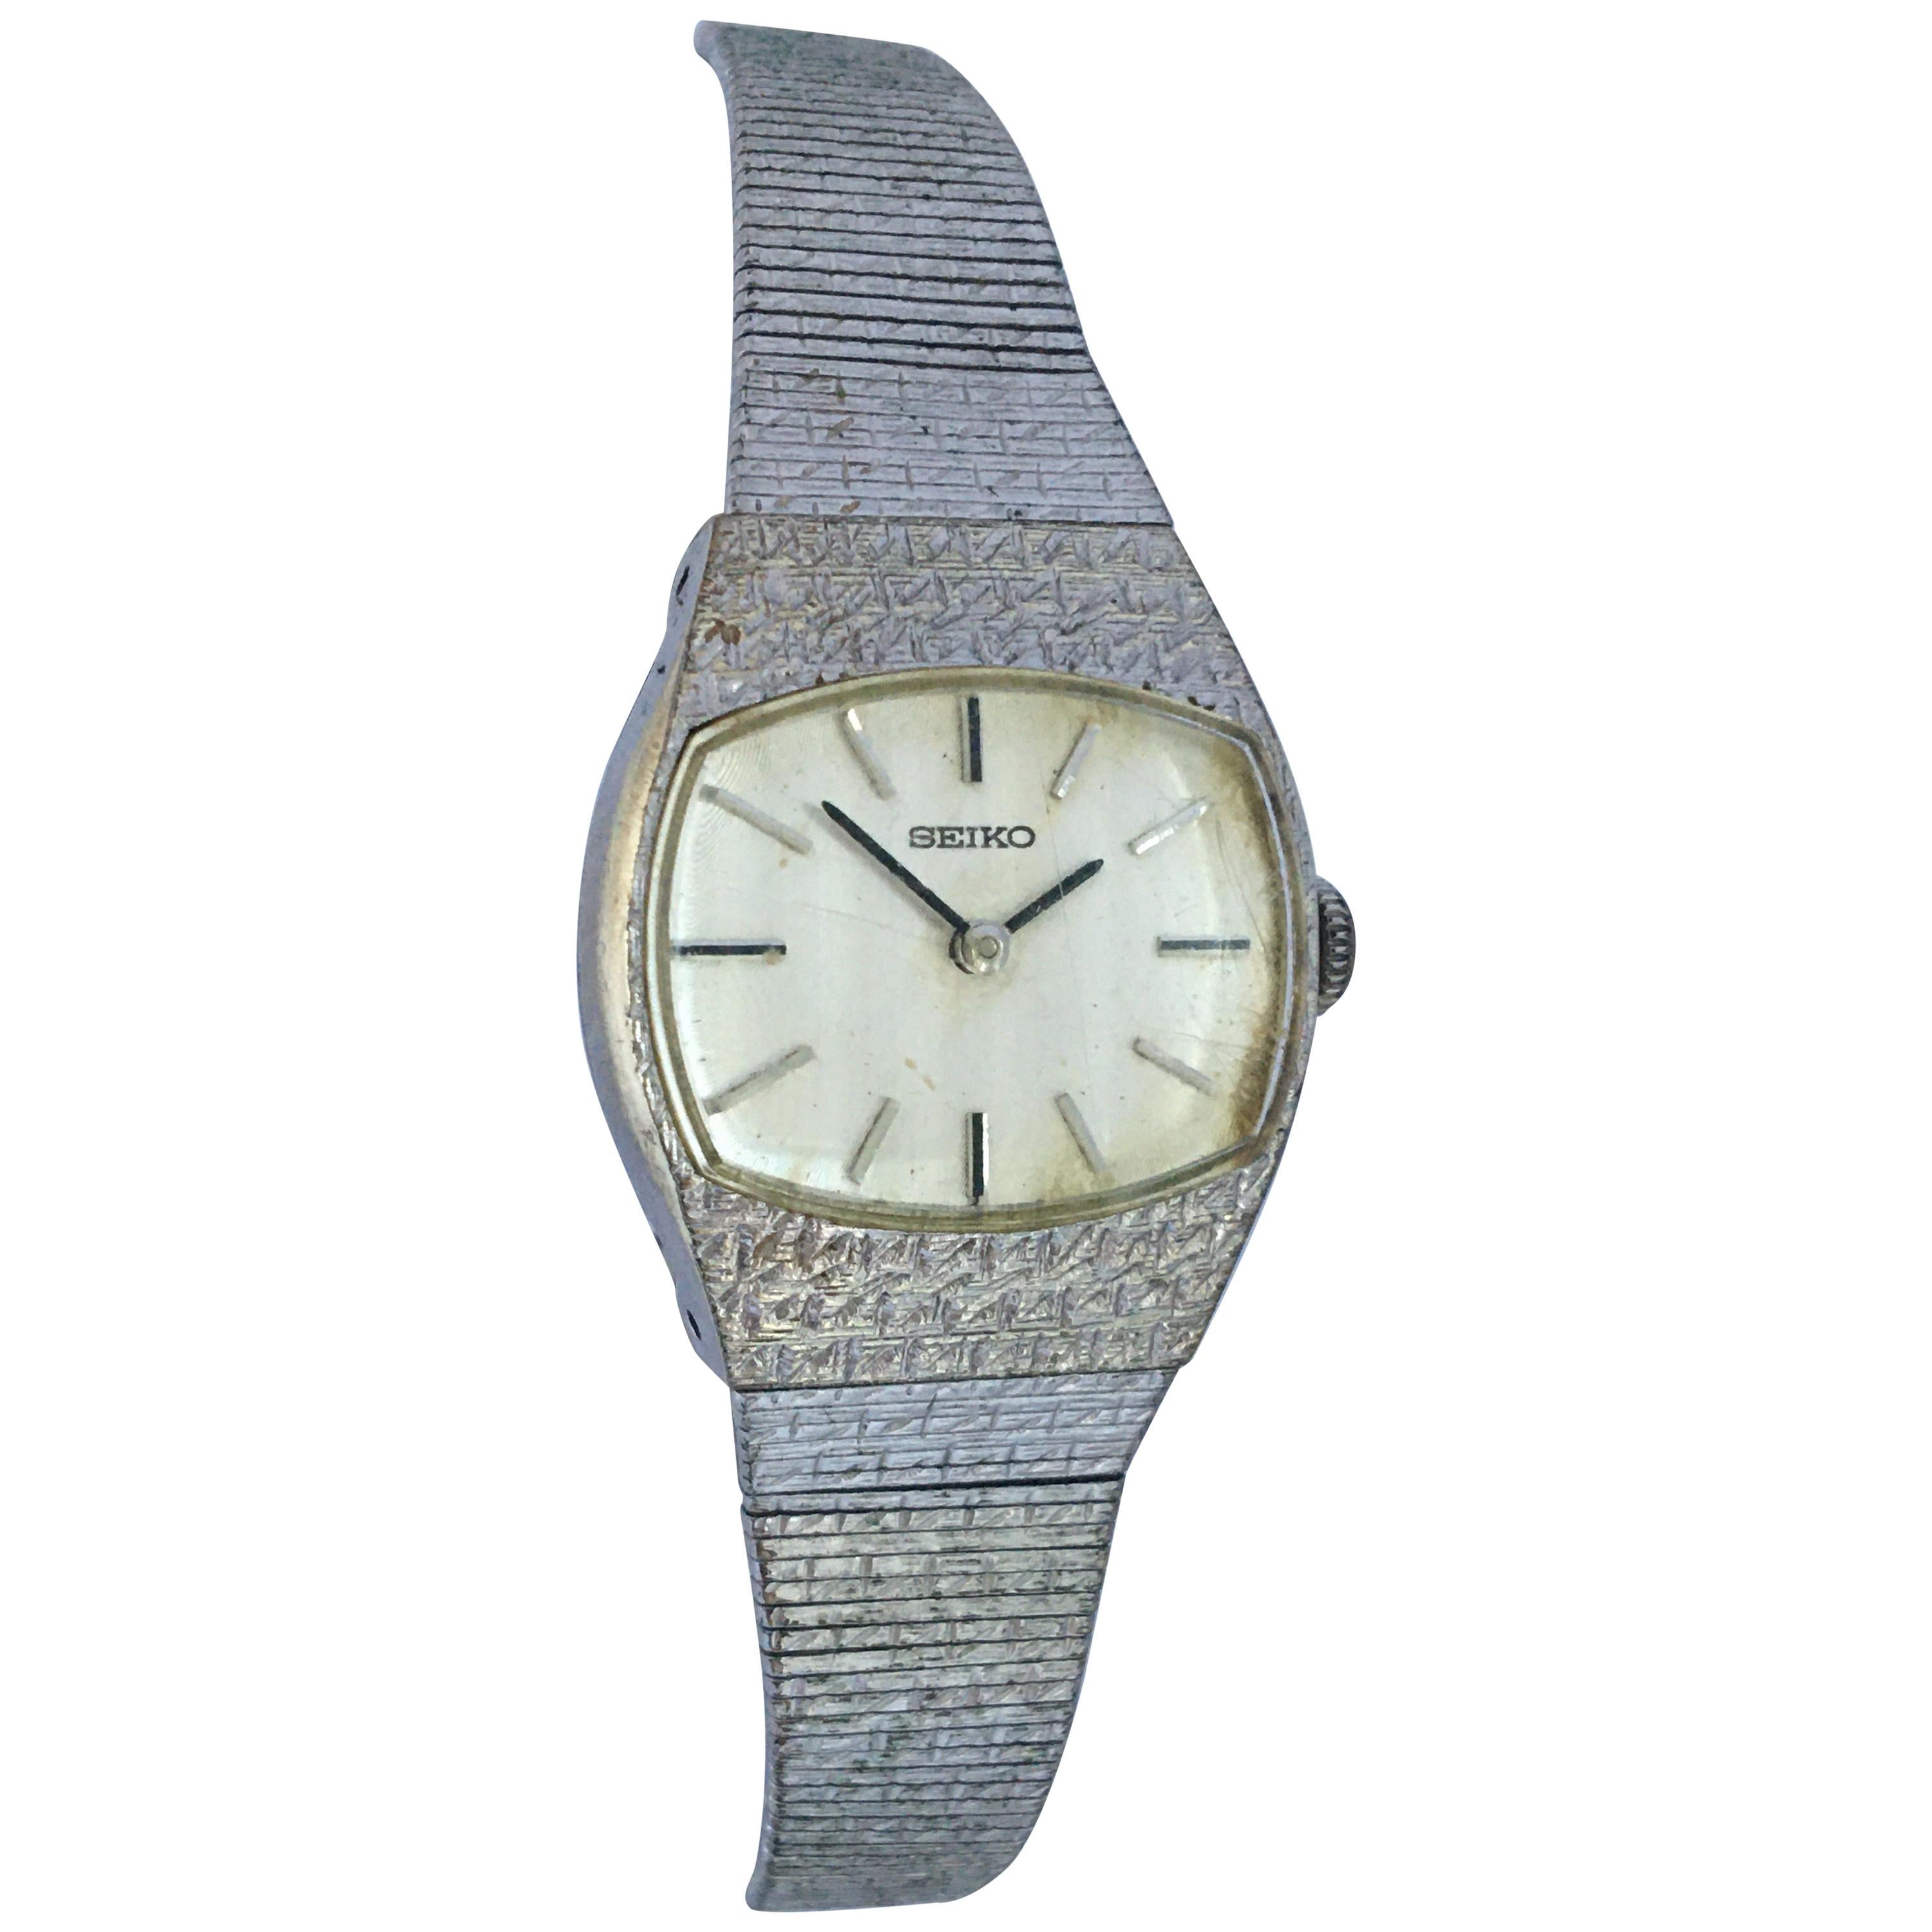 Vintage 1980s Seiko Mechanical Ladies Watch For Sale